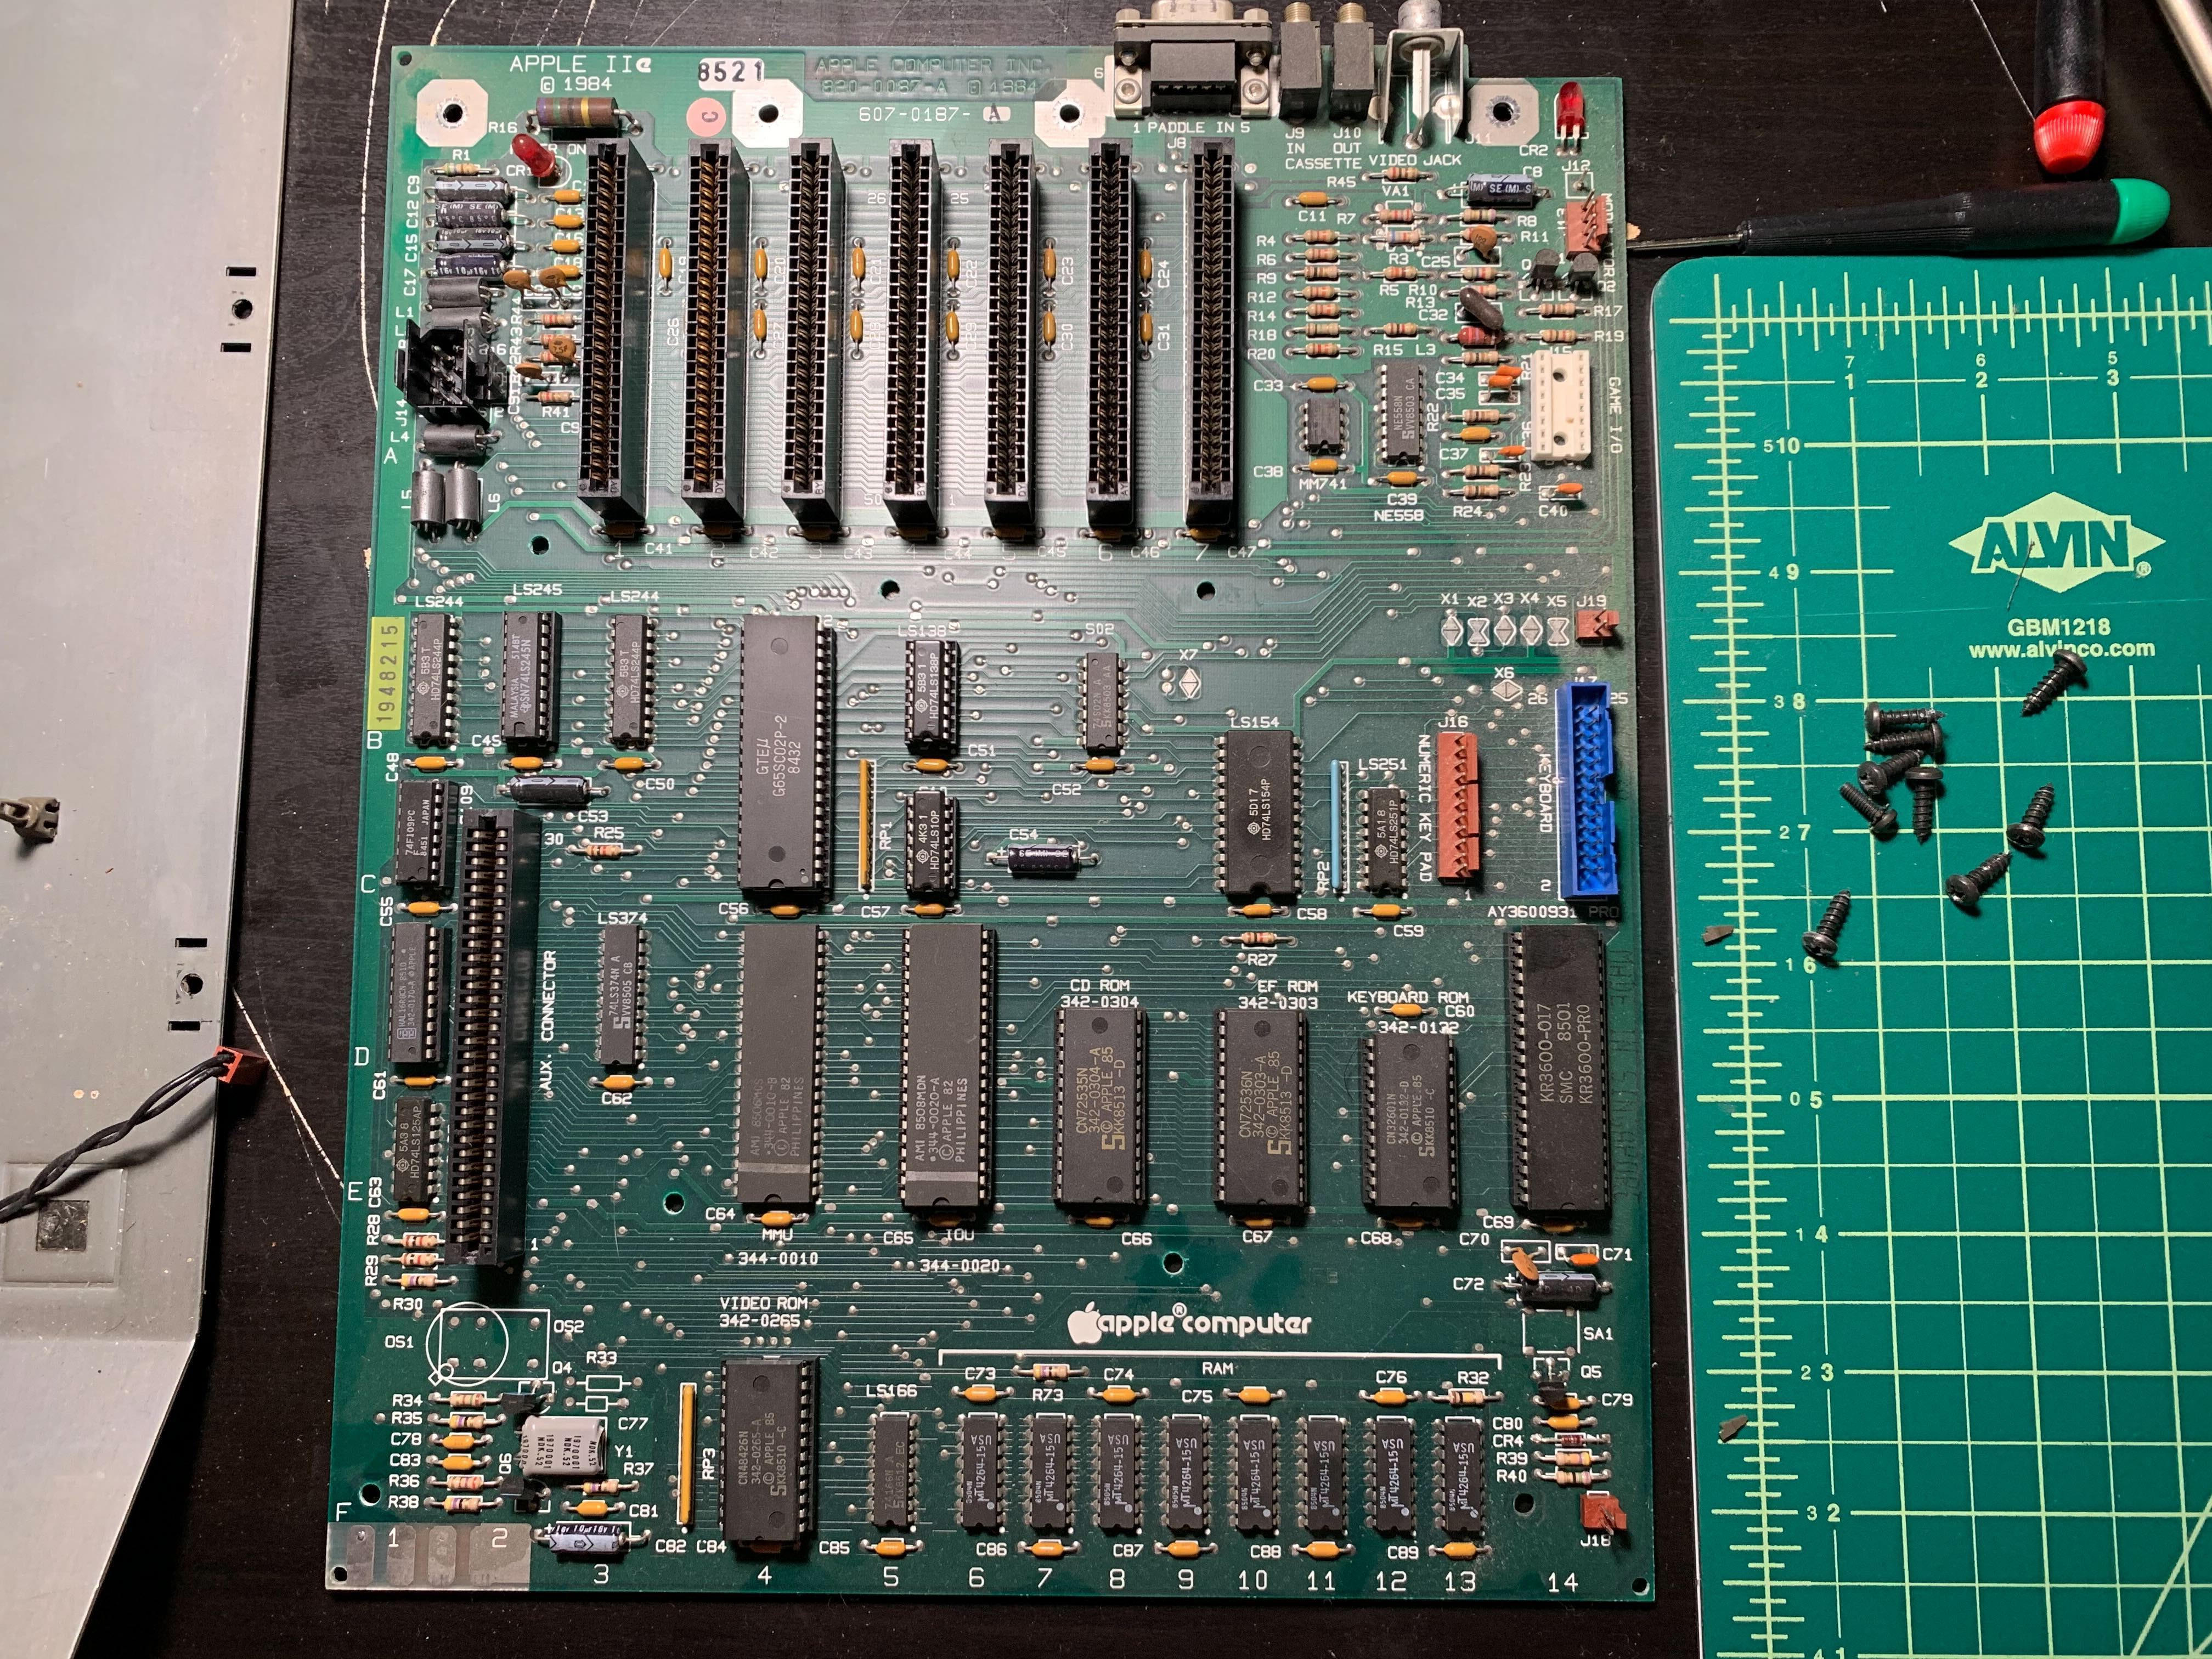 Apple IIe motherboard out of the case